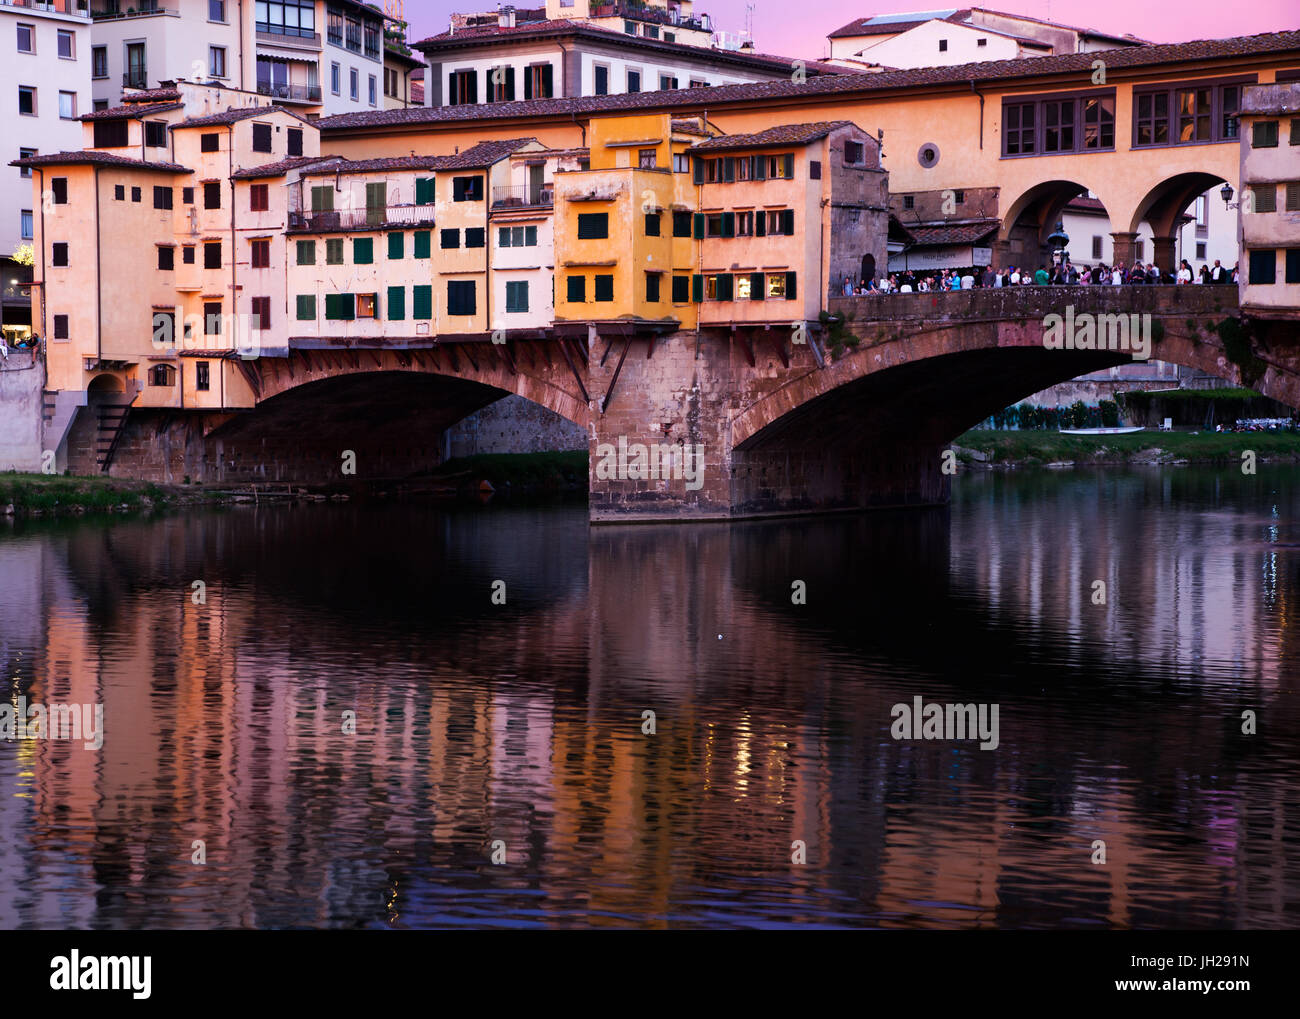 Ponte Vecchio at sunset reflected in the River Arno, Florence, UNESCO World Heritage Site, Tuscany, Italy, Europe Stock Photo